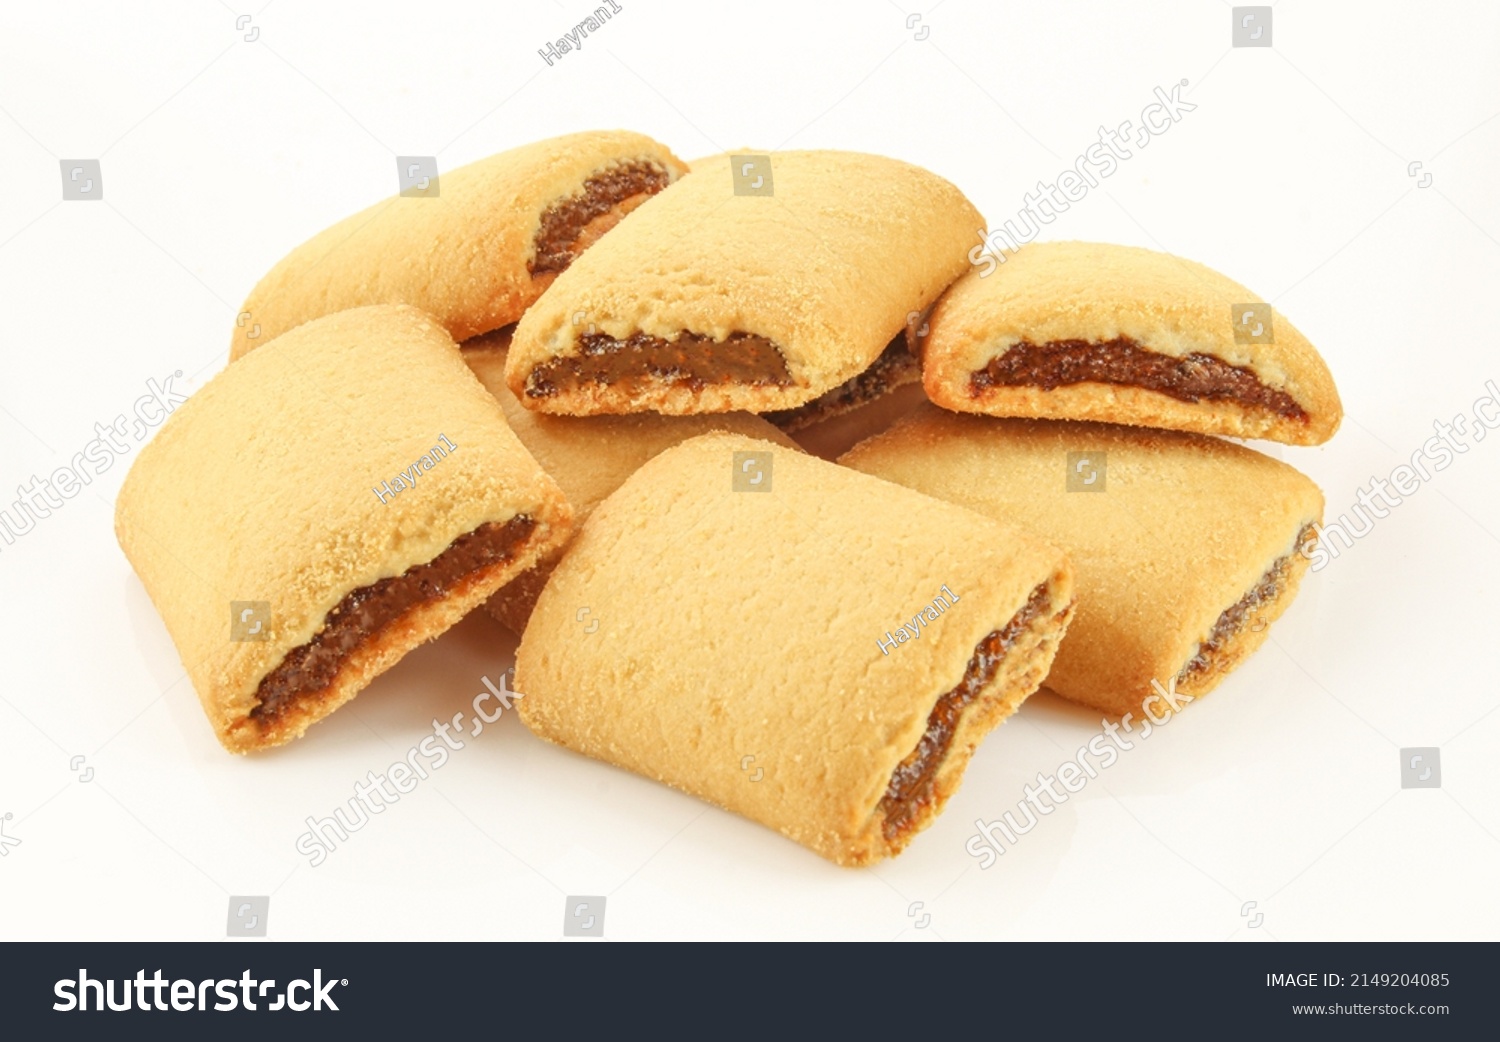 Pile of jam filled strudel biscuits isolated on white background #2149204085